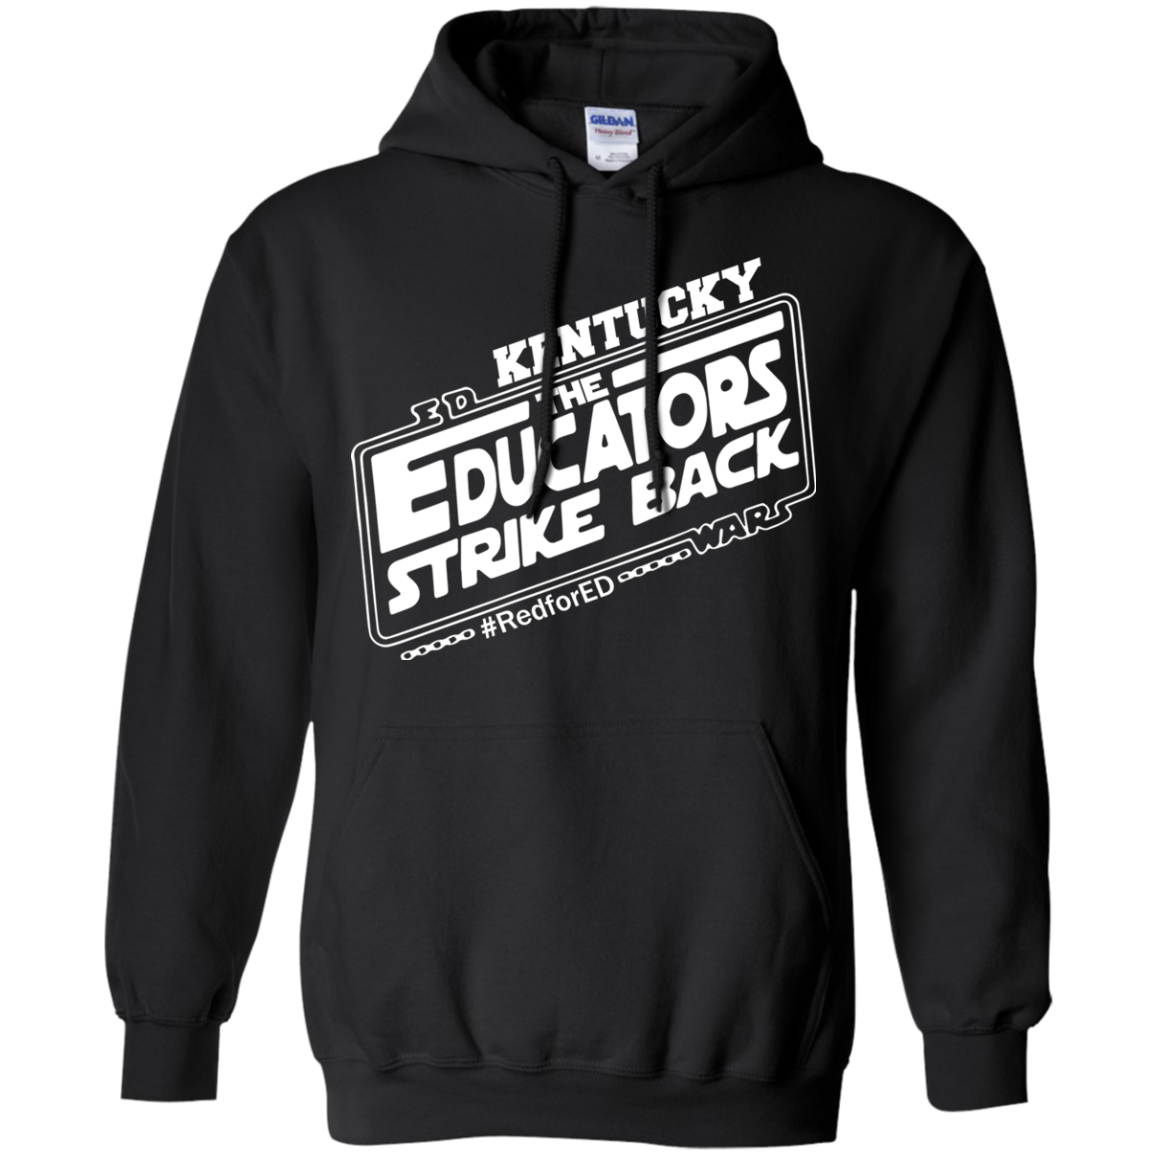 Cover Your Body With Amazing Kentucky Ed The Educators Strike Back War Redfored - Tula Store Shirts